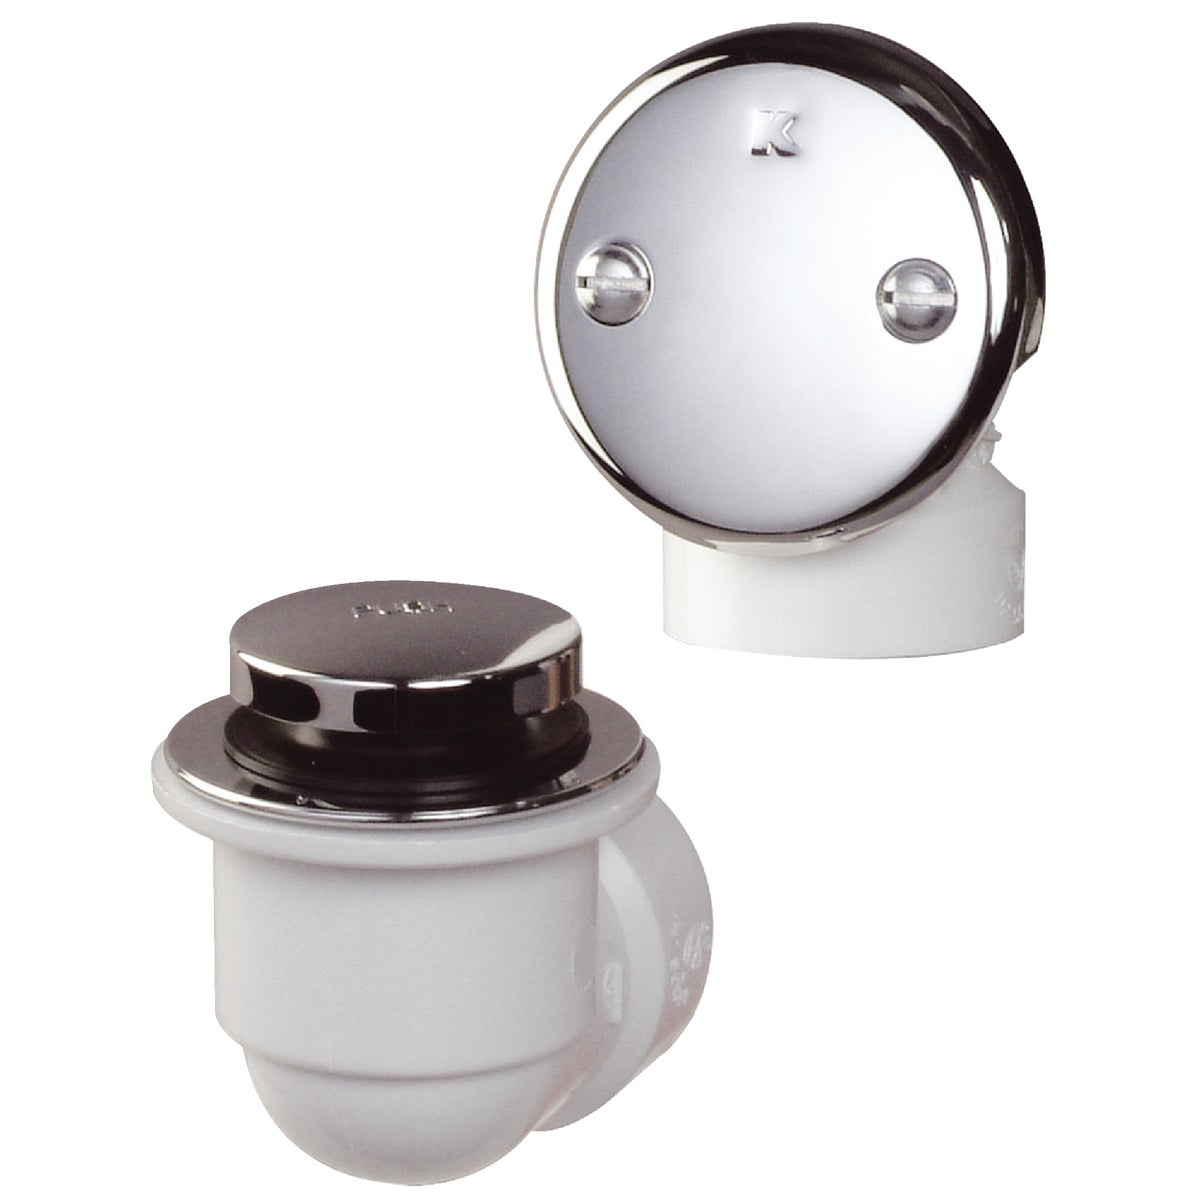 Do it Schedule 40 PVC Bathtub Drain Stopper with Polished Chrome Foot Lok Stop